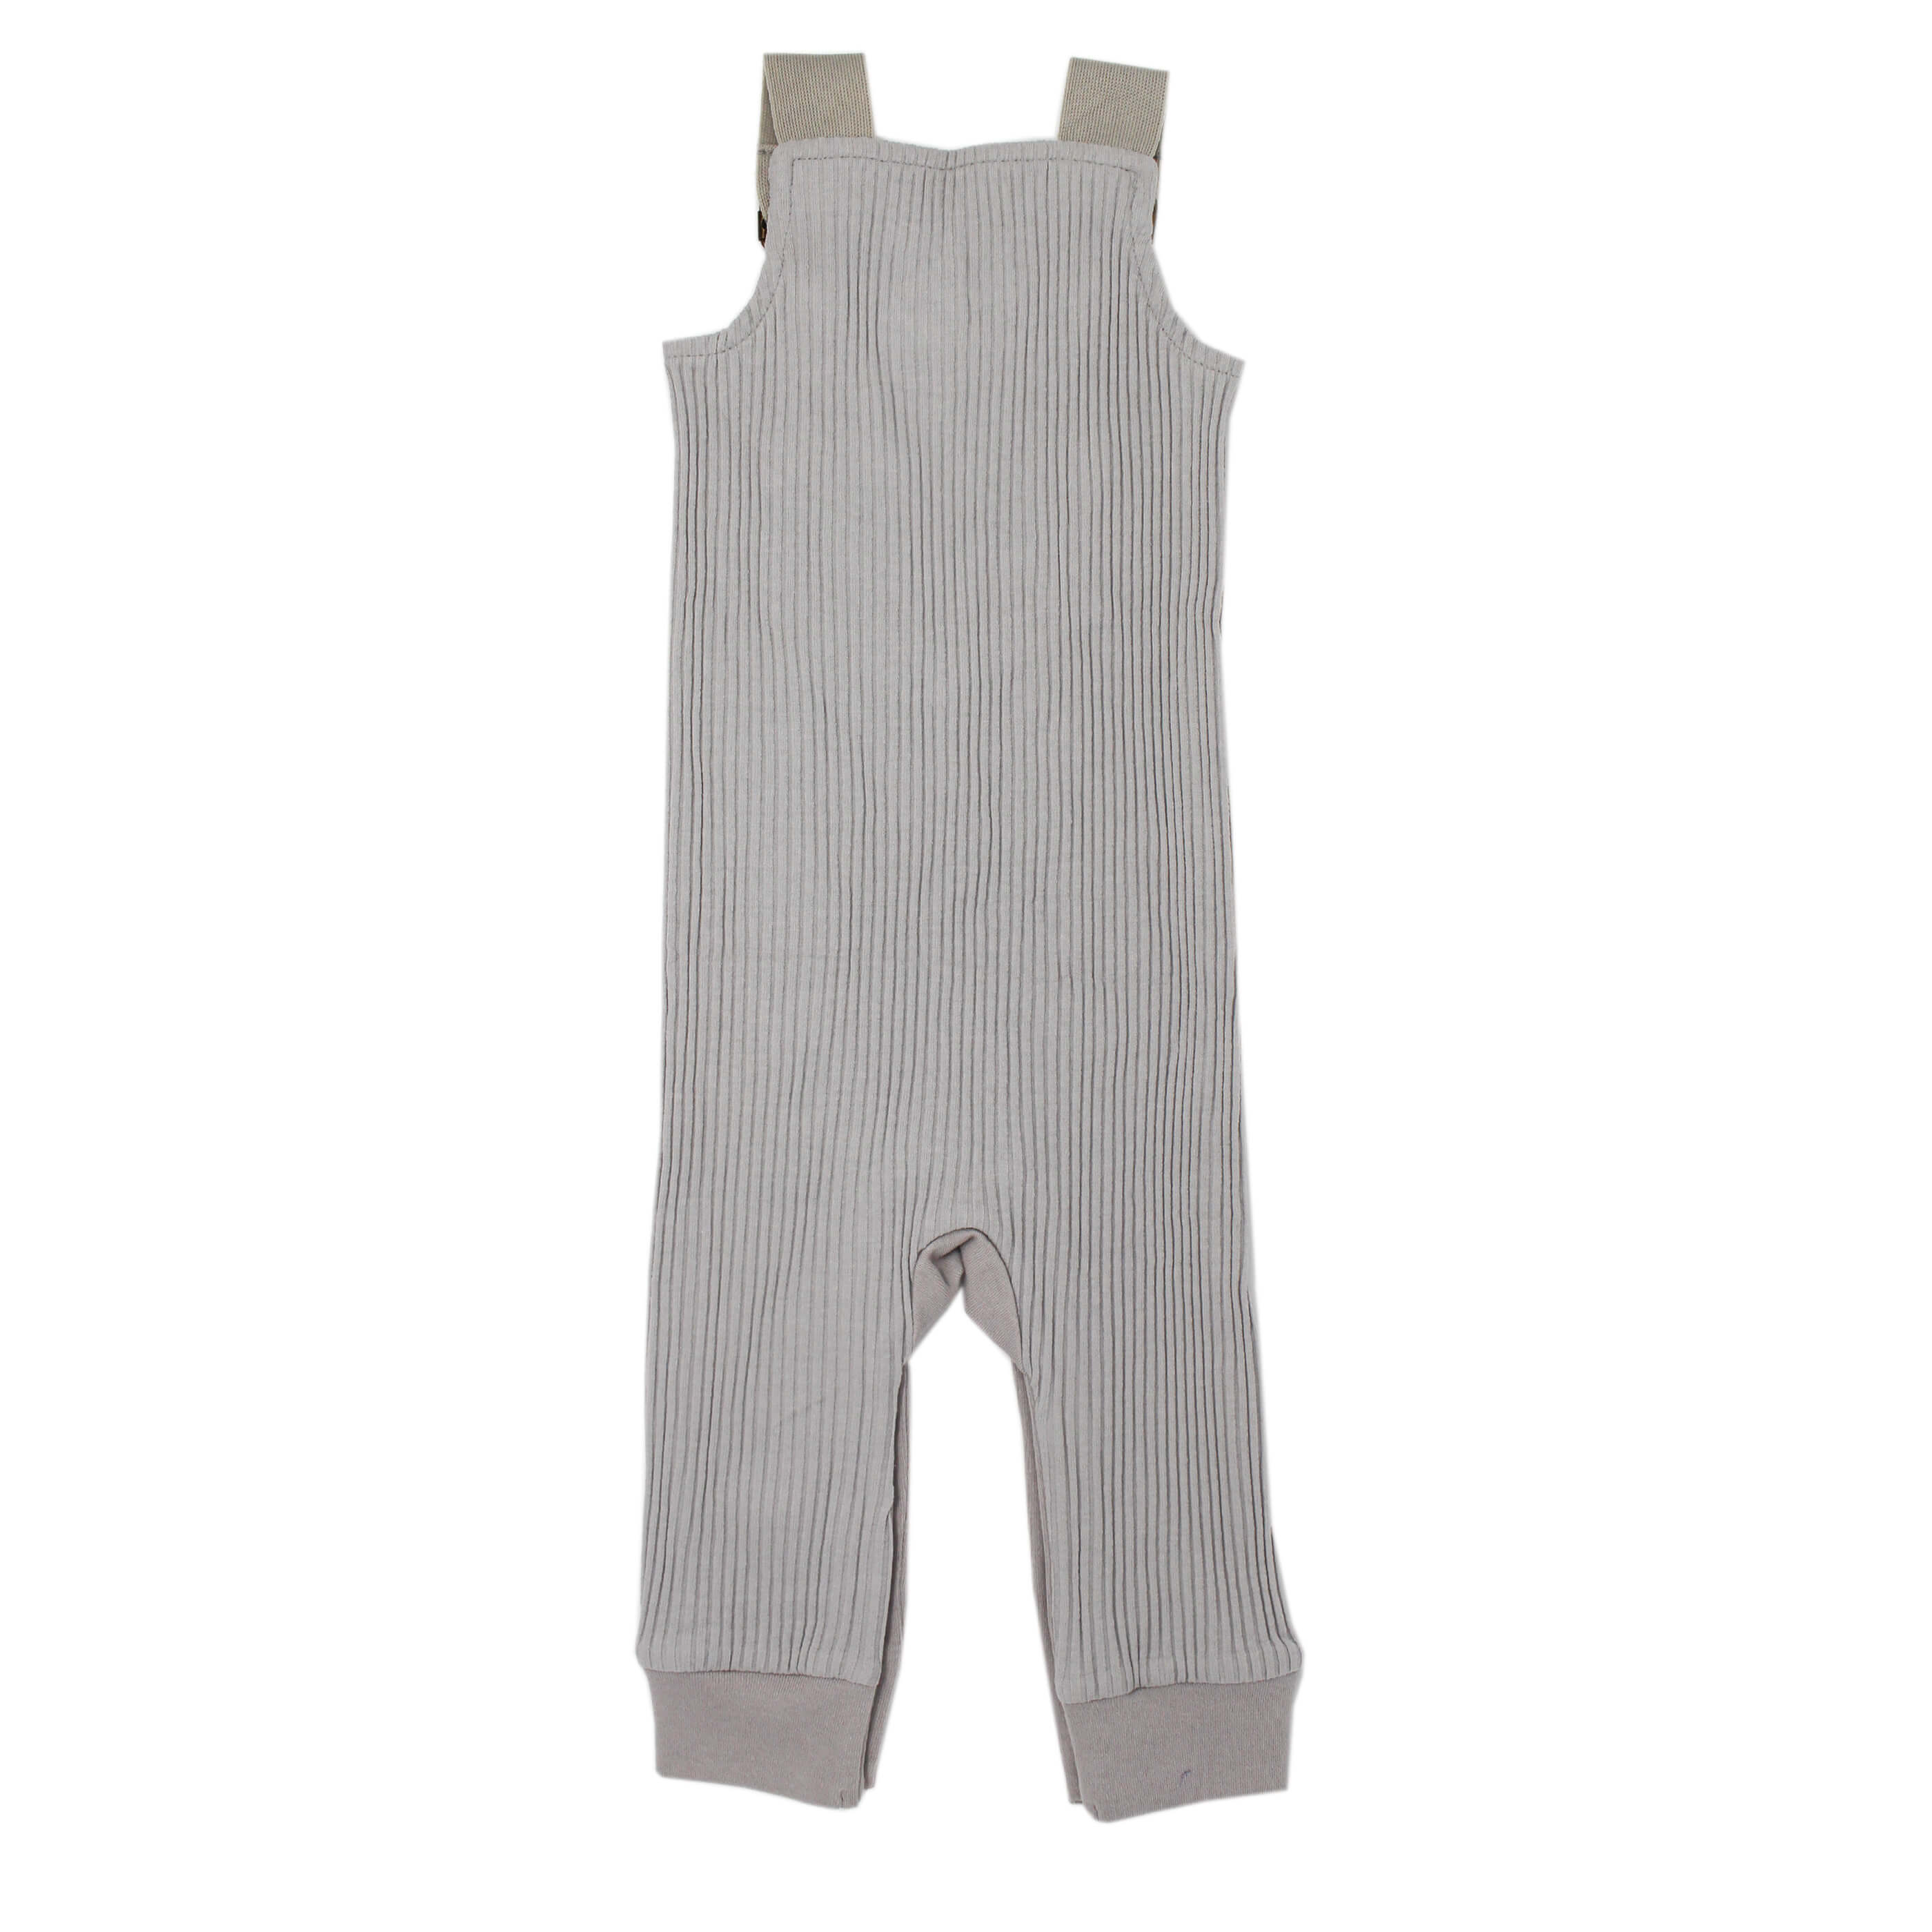 Footless Ribbed Overall in Light Gray